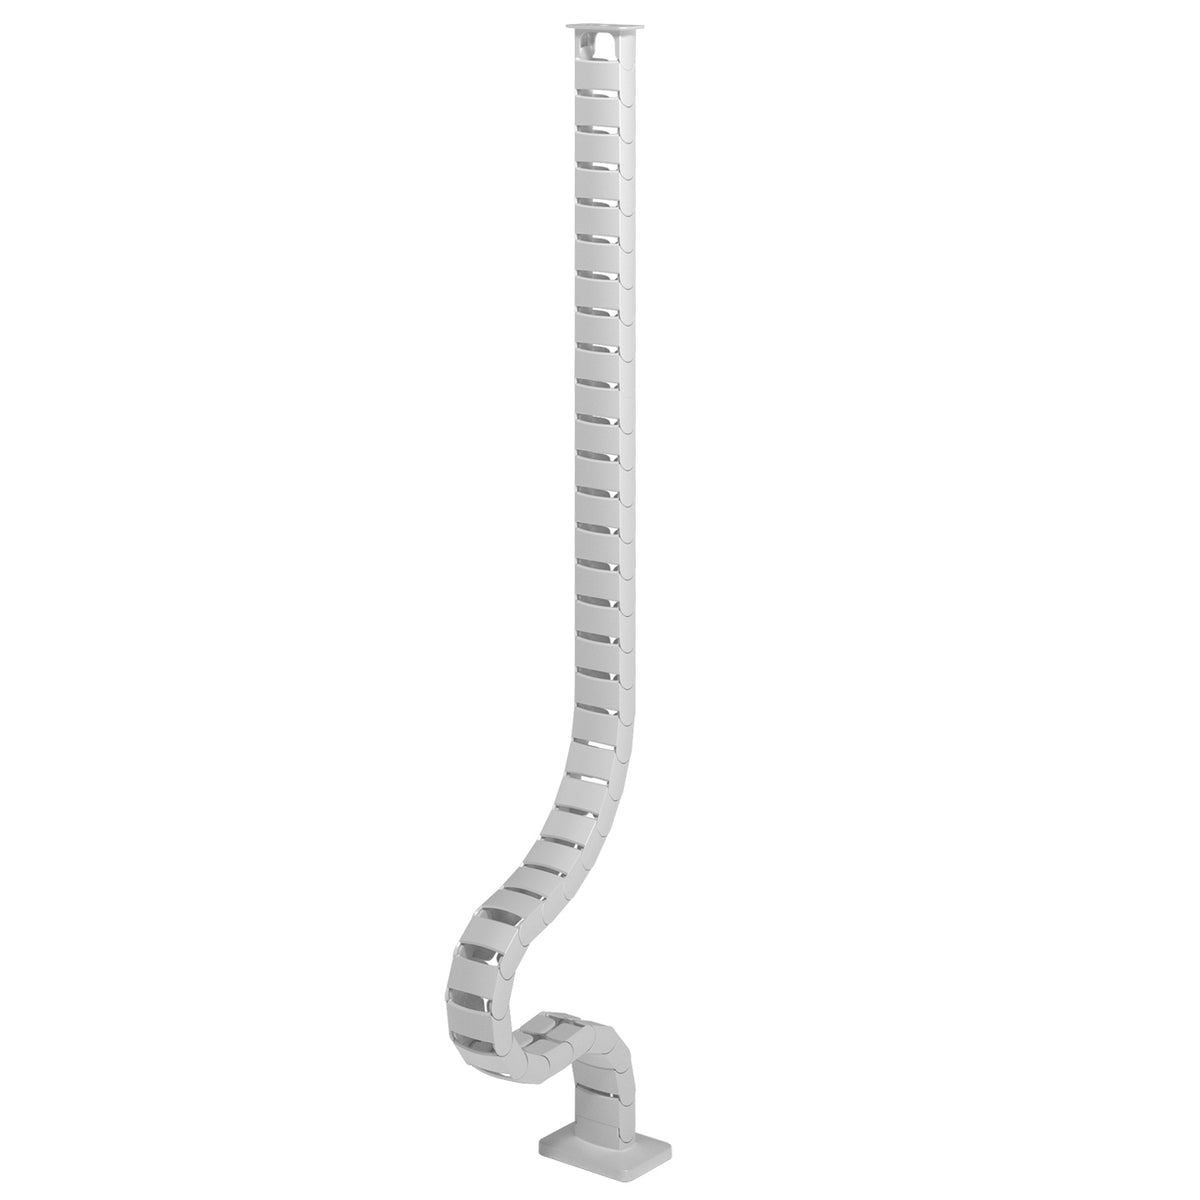 Addit cable guide sit-stand 130 cm - desk